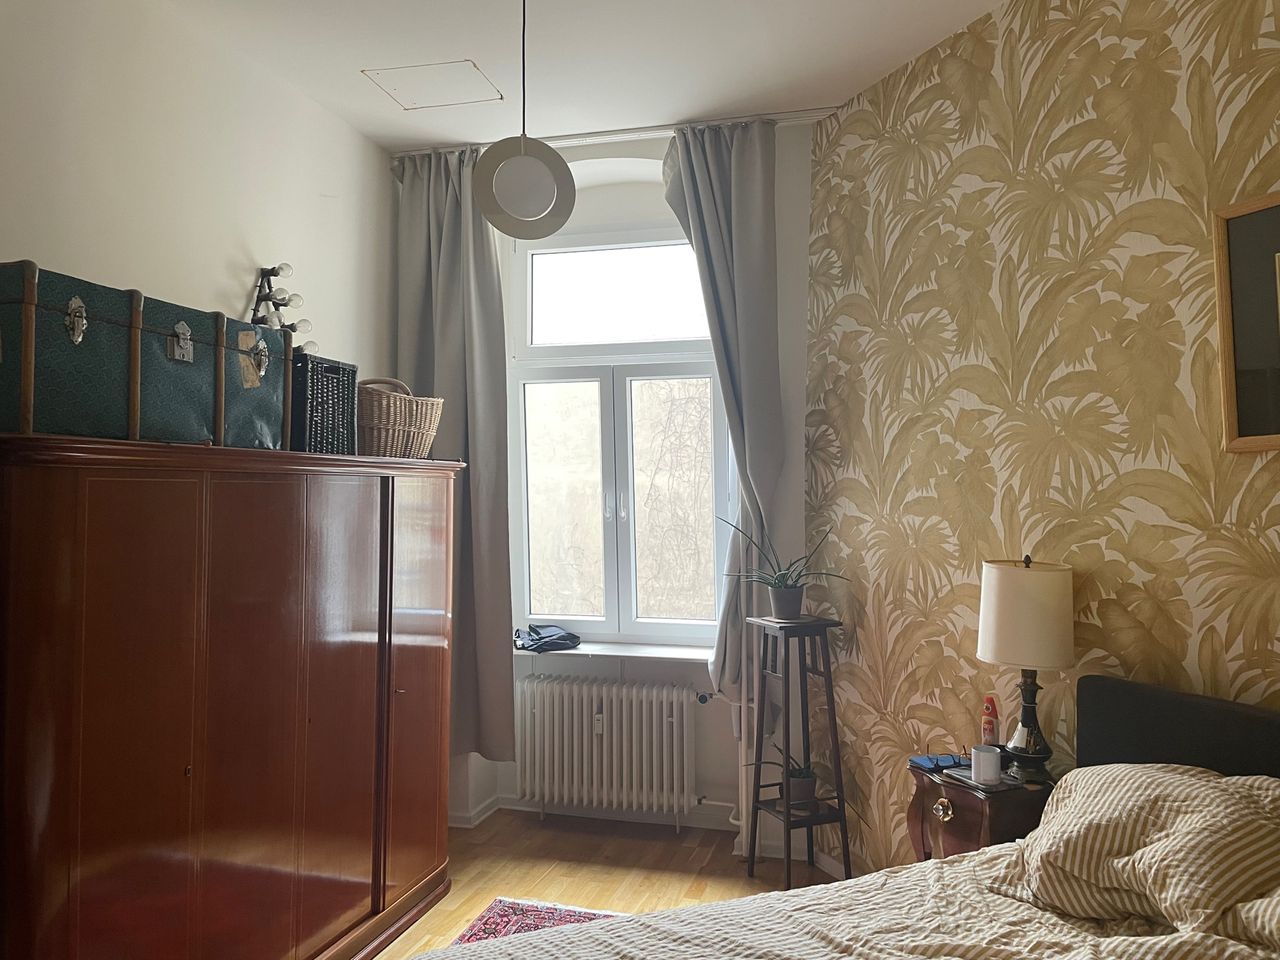 Spacious 19th Century Apartment with Balcony Overlooking the River Spree